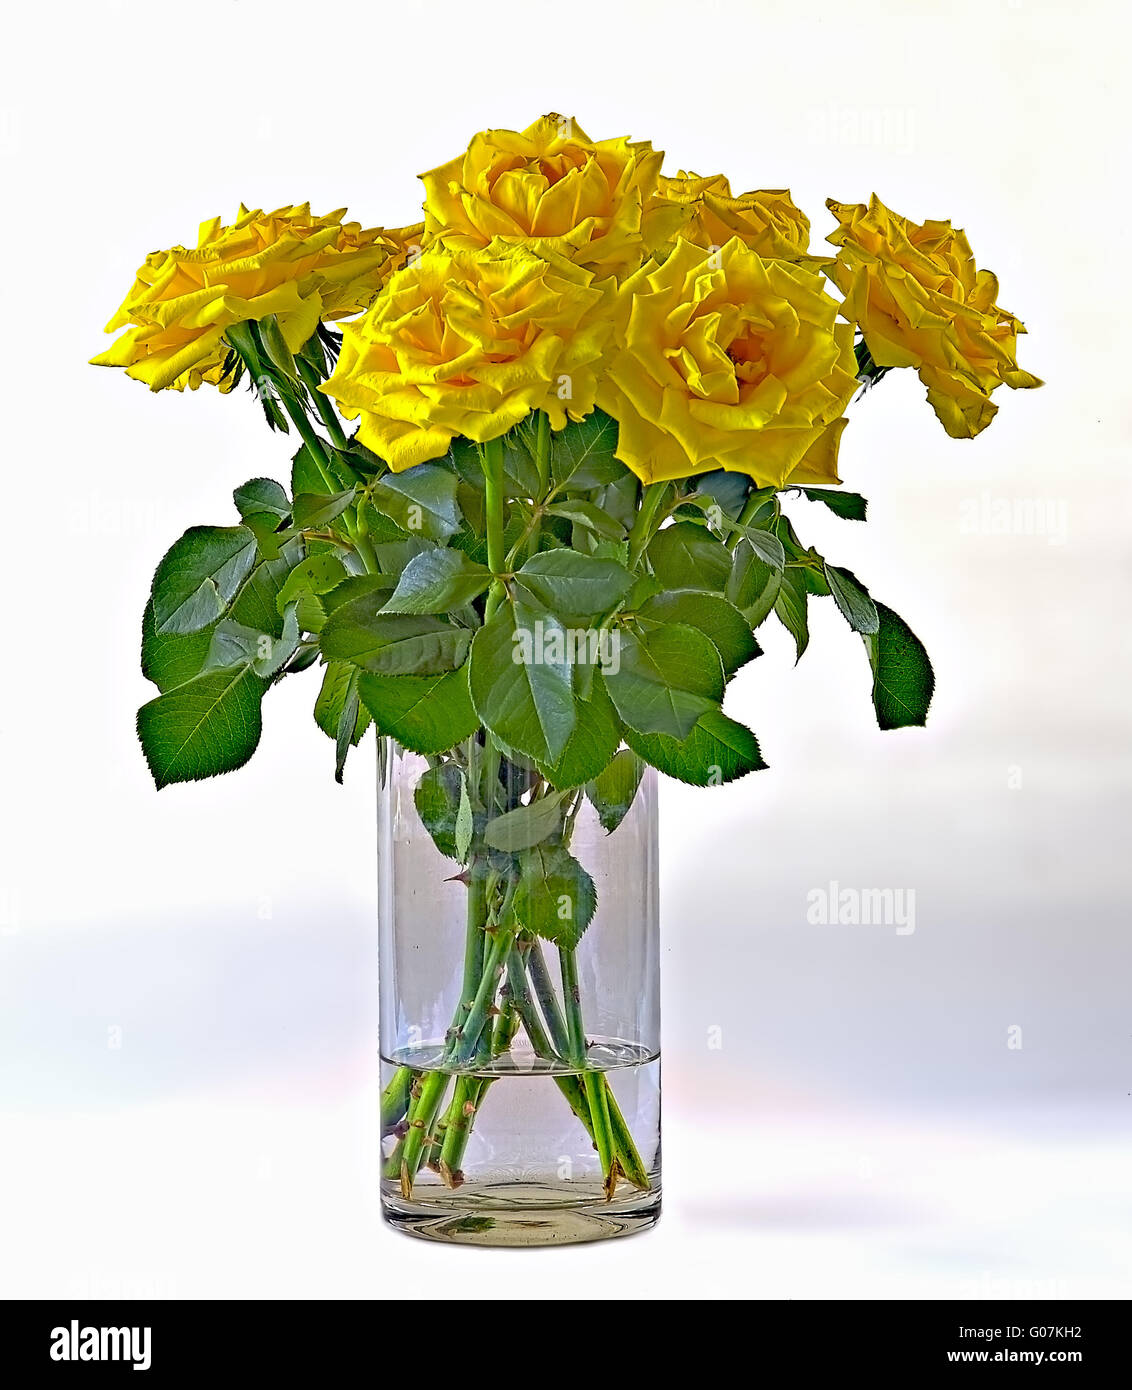 A bunch of yellow roses in a vase of glass. Stock Photo